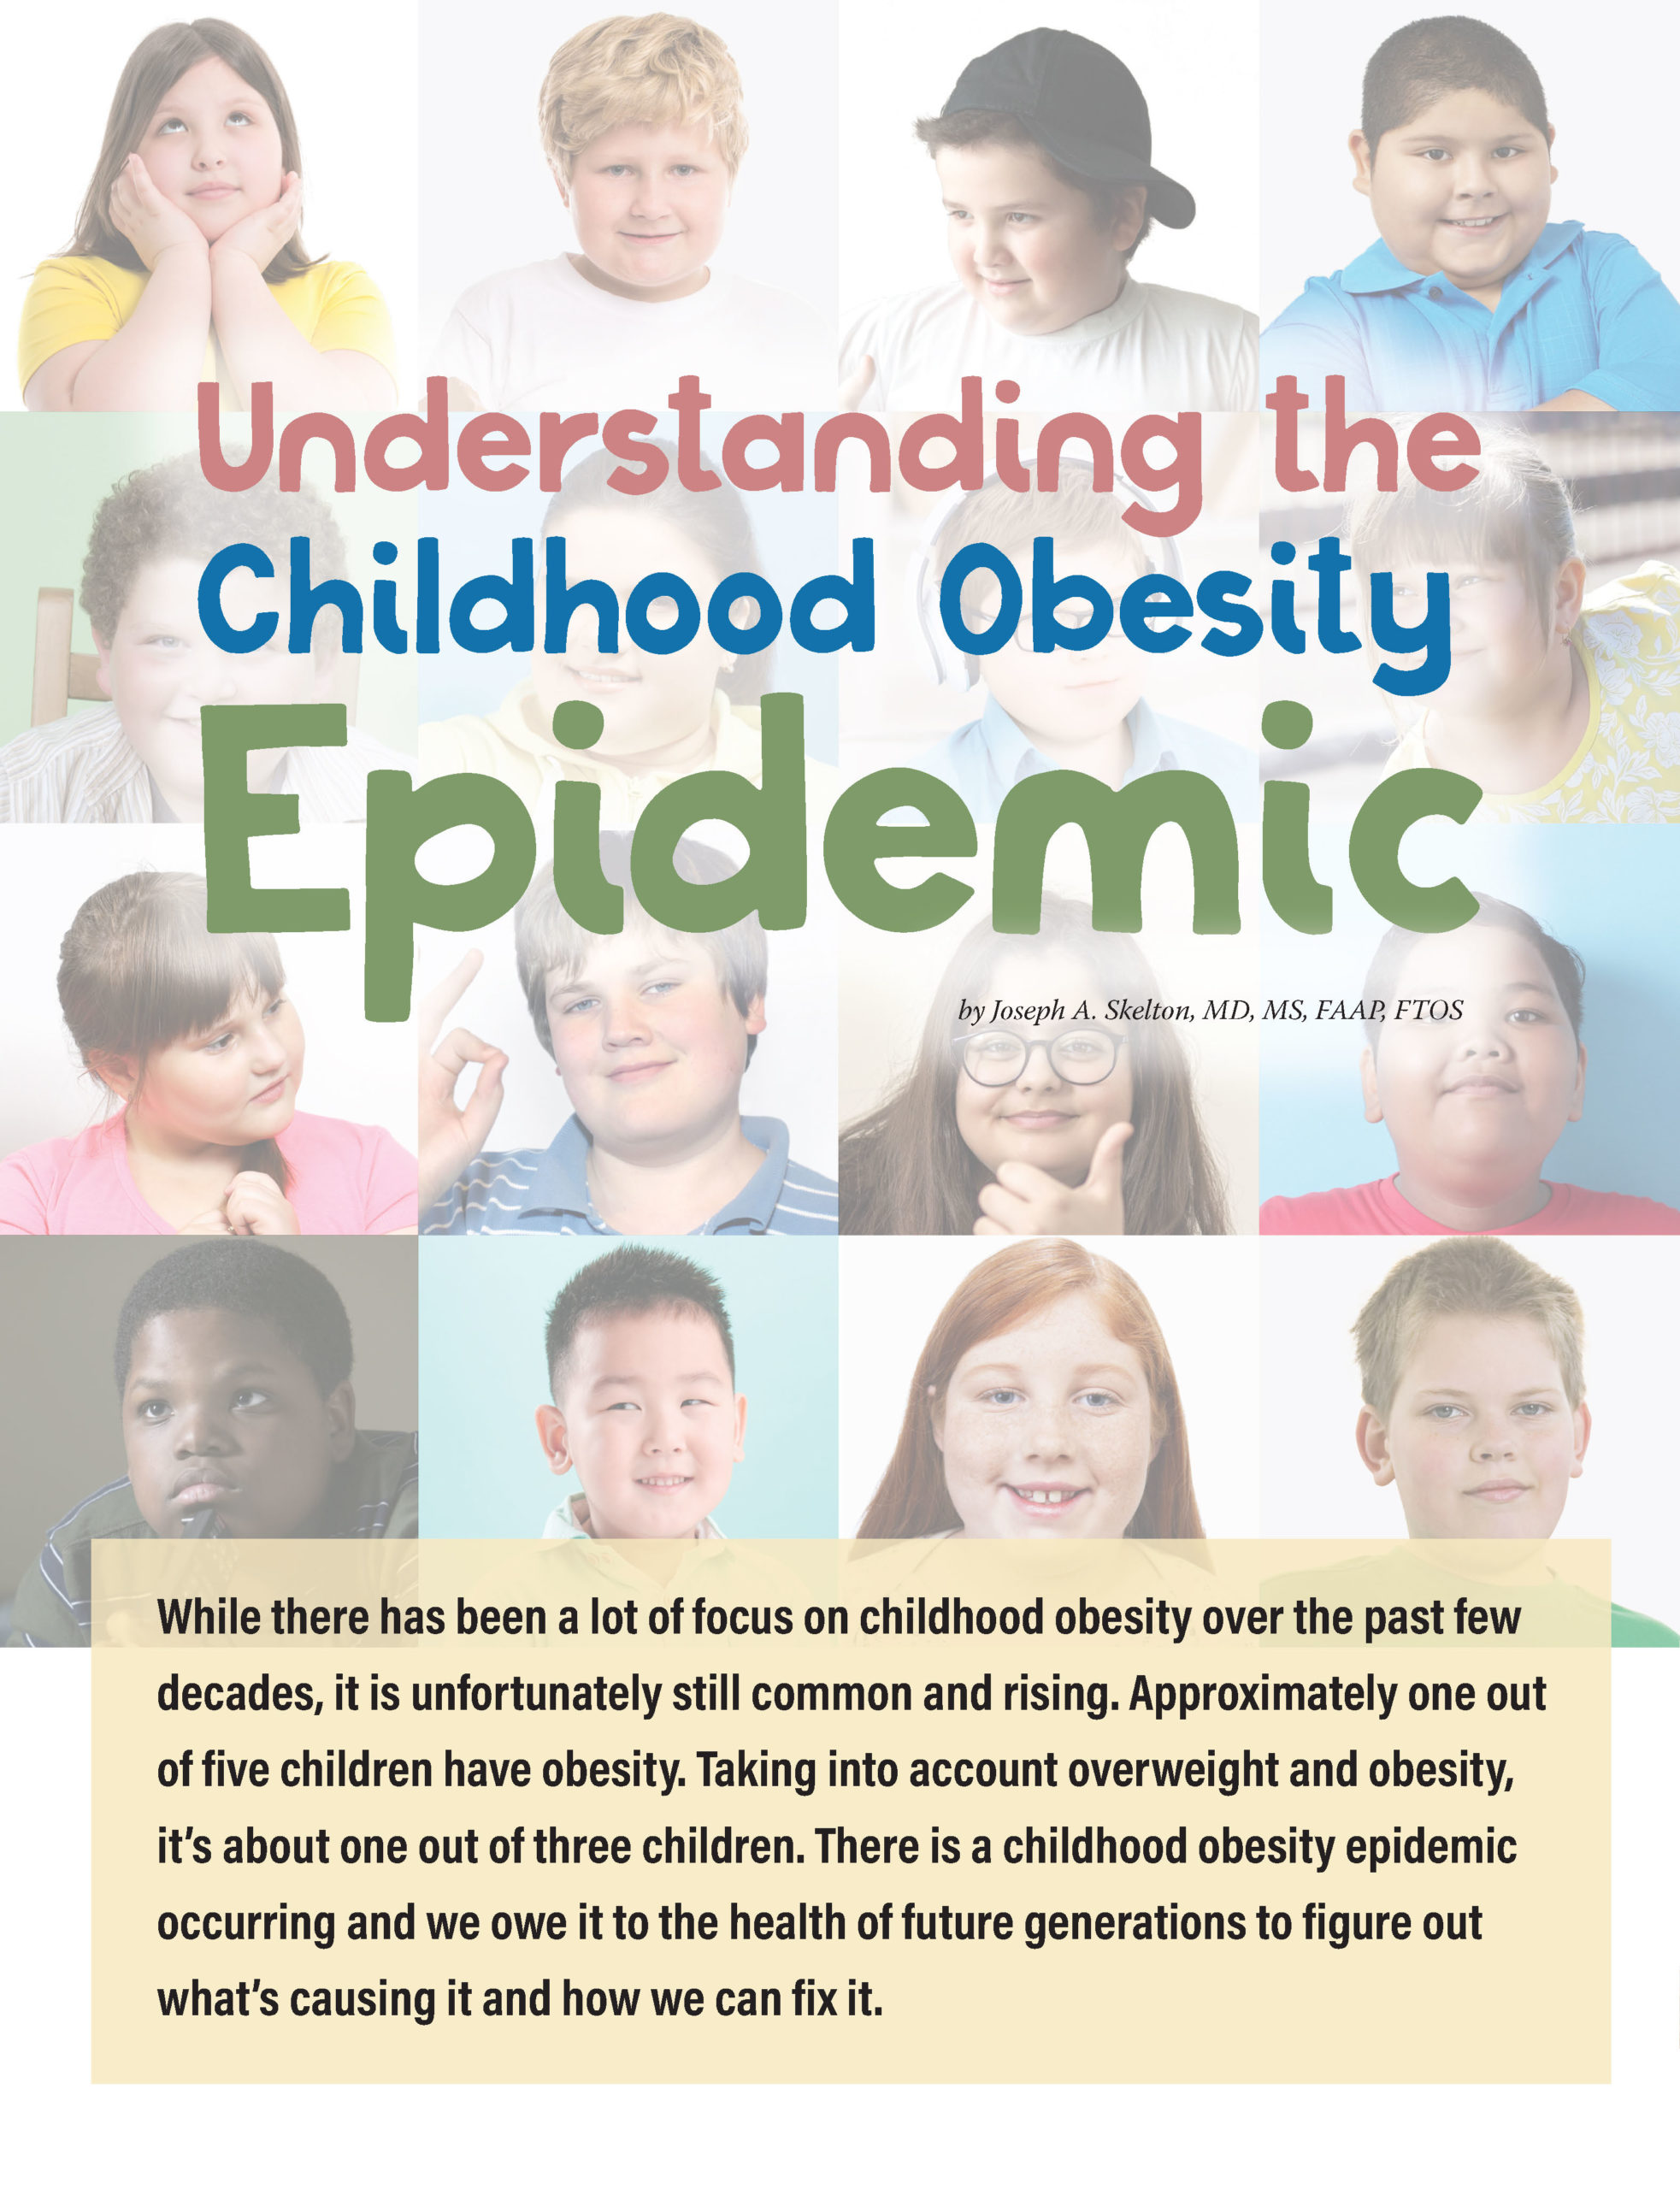 research study on childhood obesity